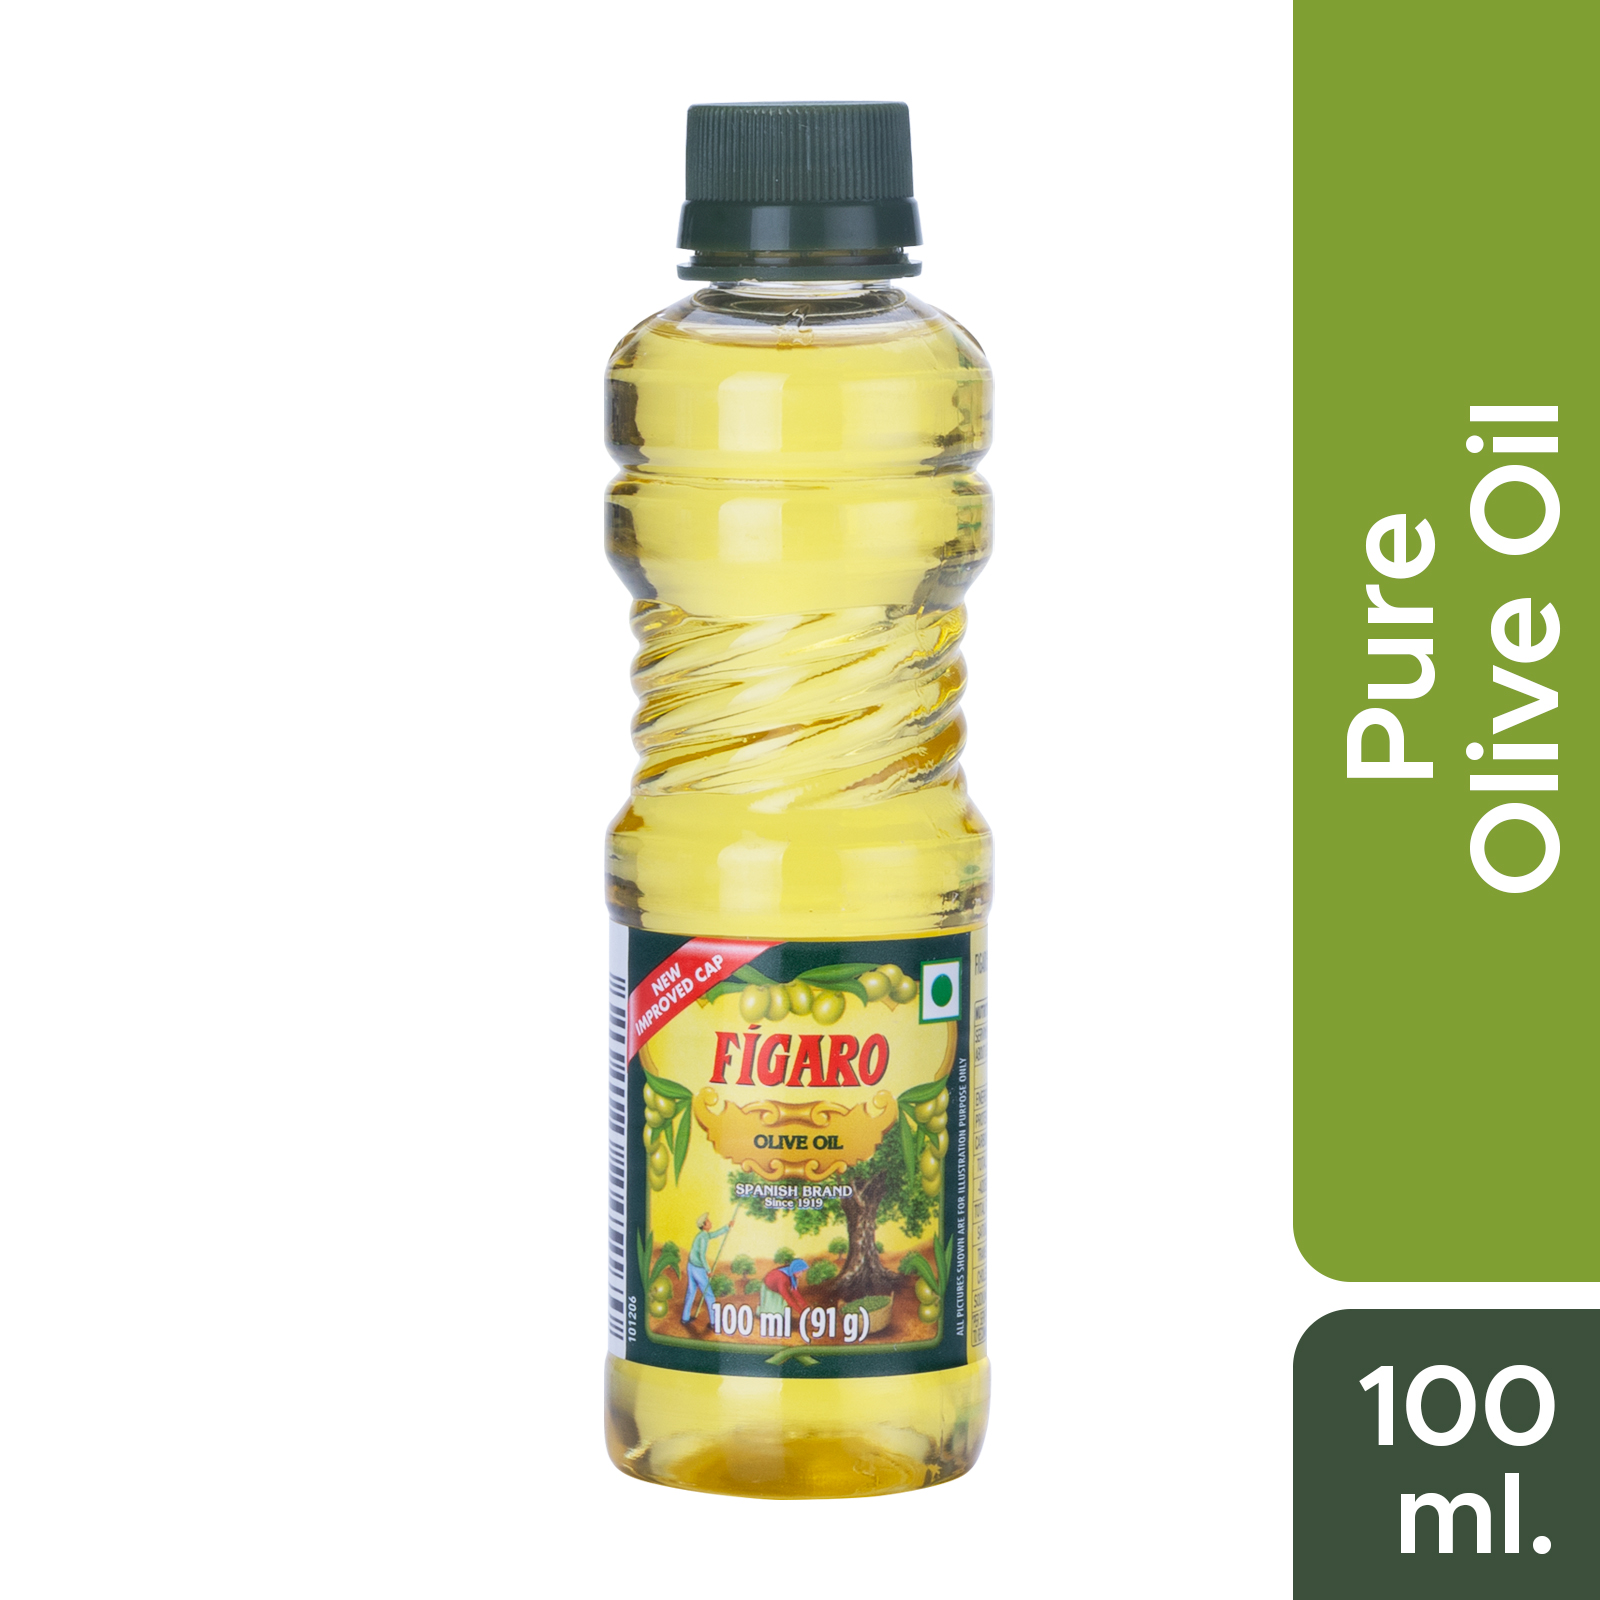 Figaro Pure Olive Oil – 100ml Bottle PRODUCT ID: 2377